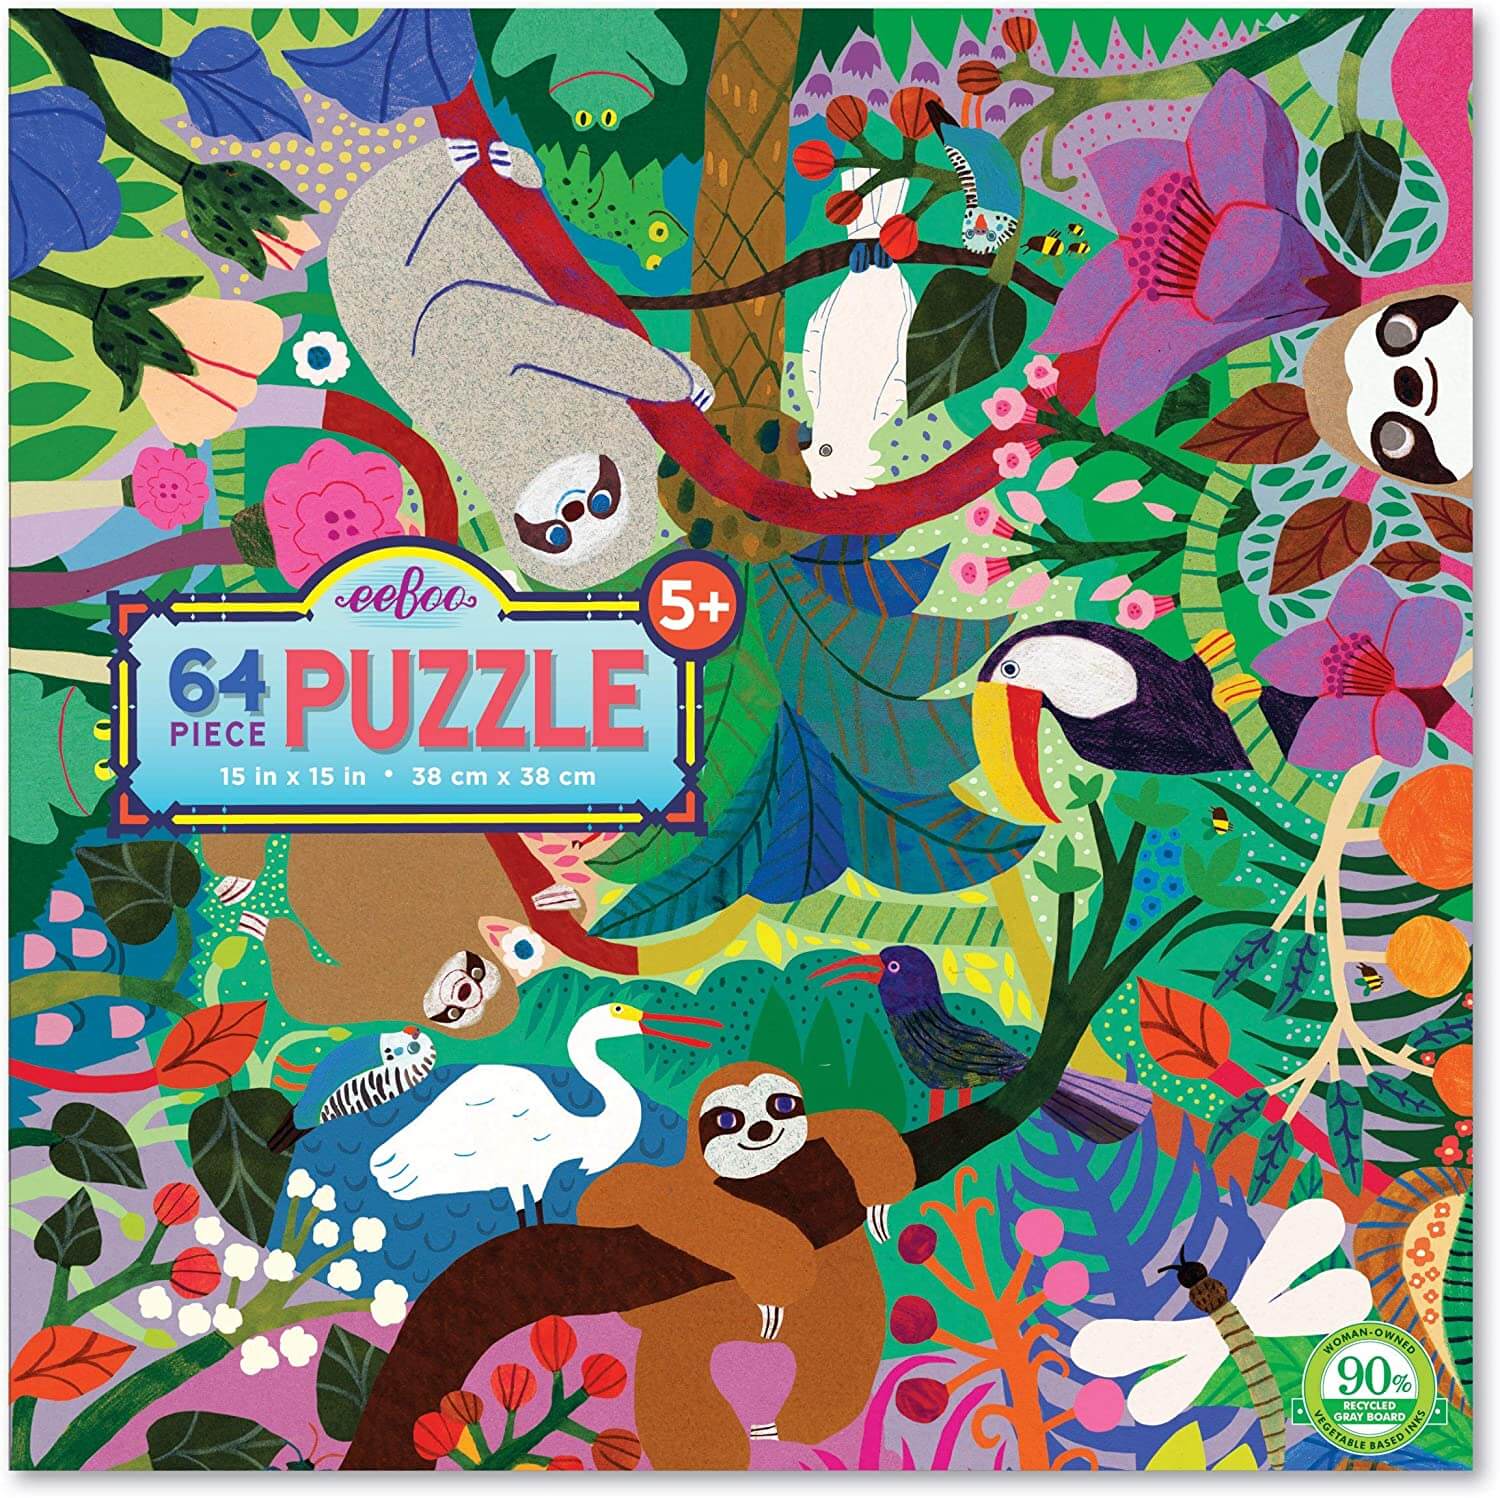 eeBoo - Sloths at Play 64 Piece Jigsaw Puzzle for Kids